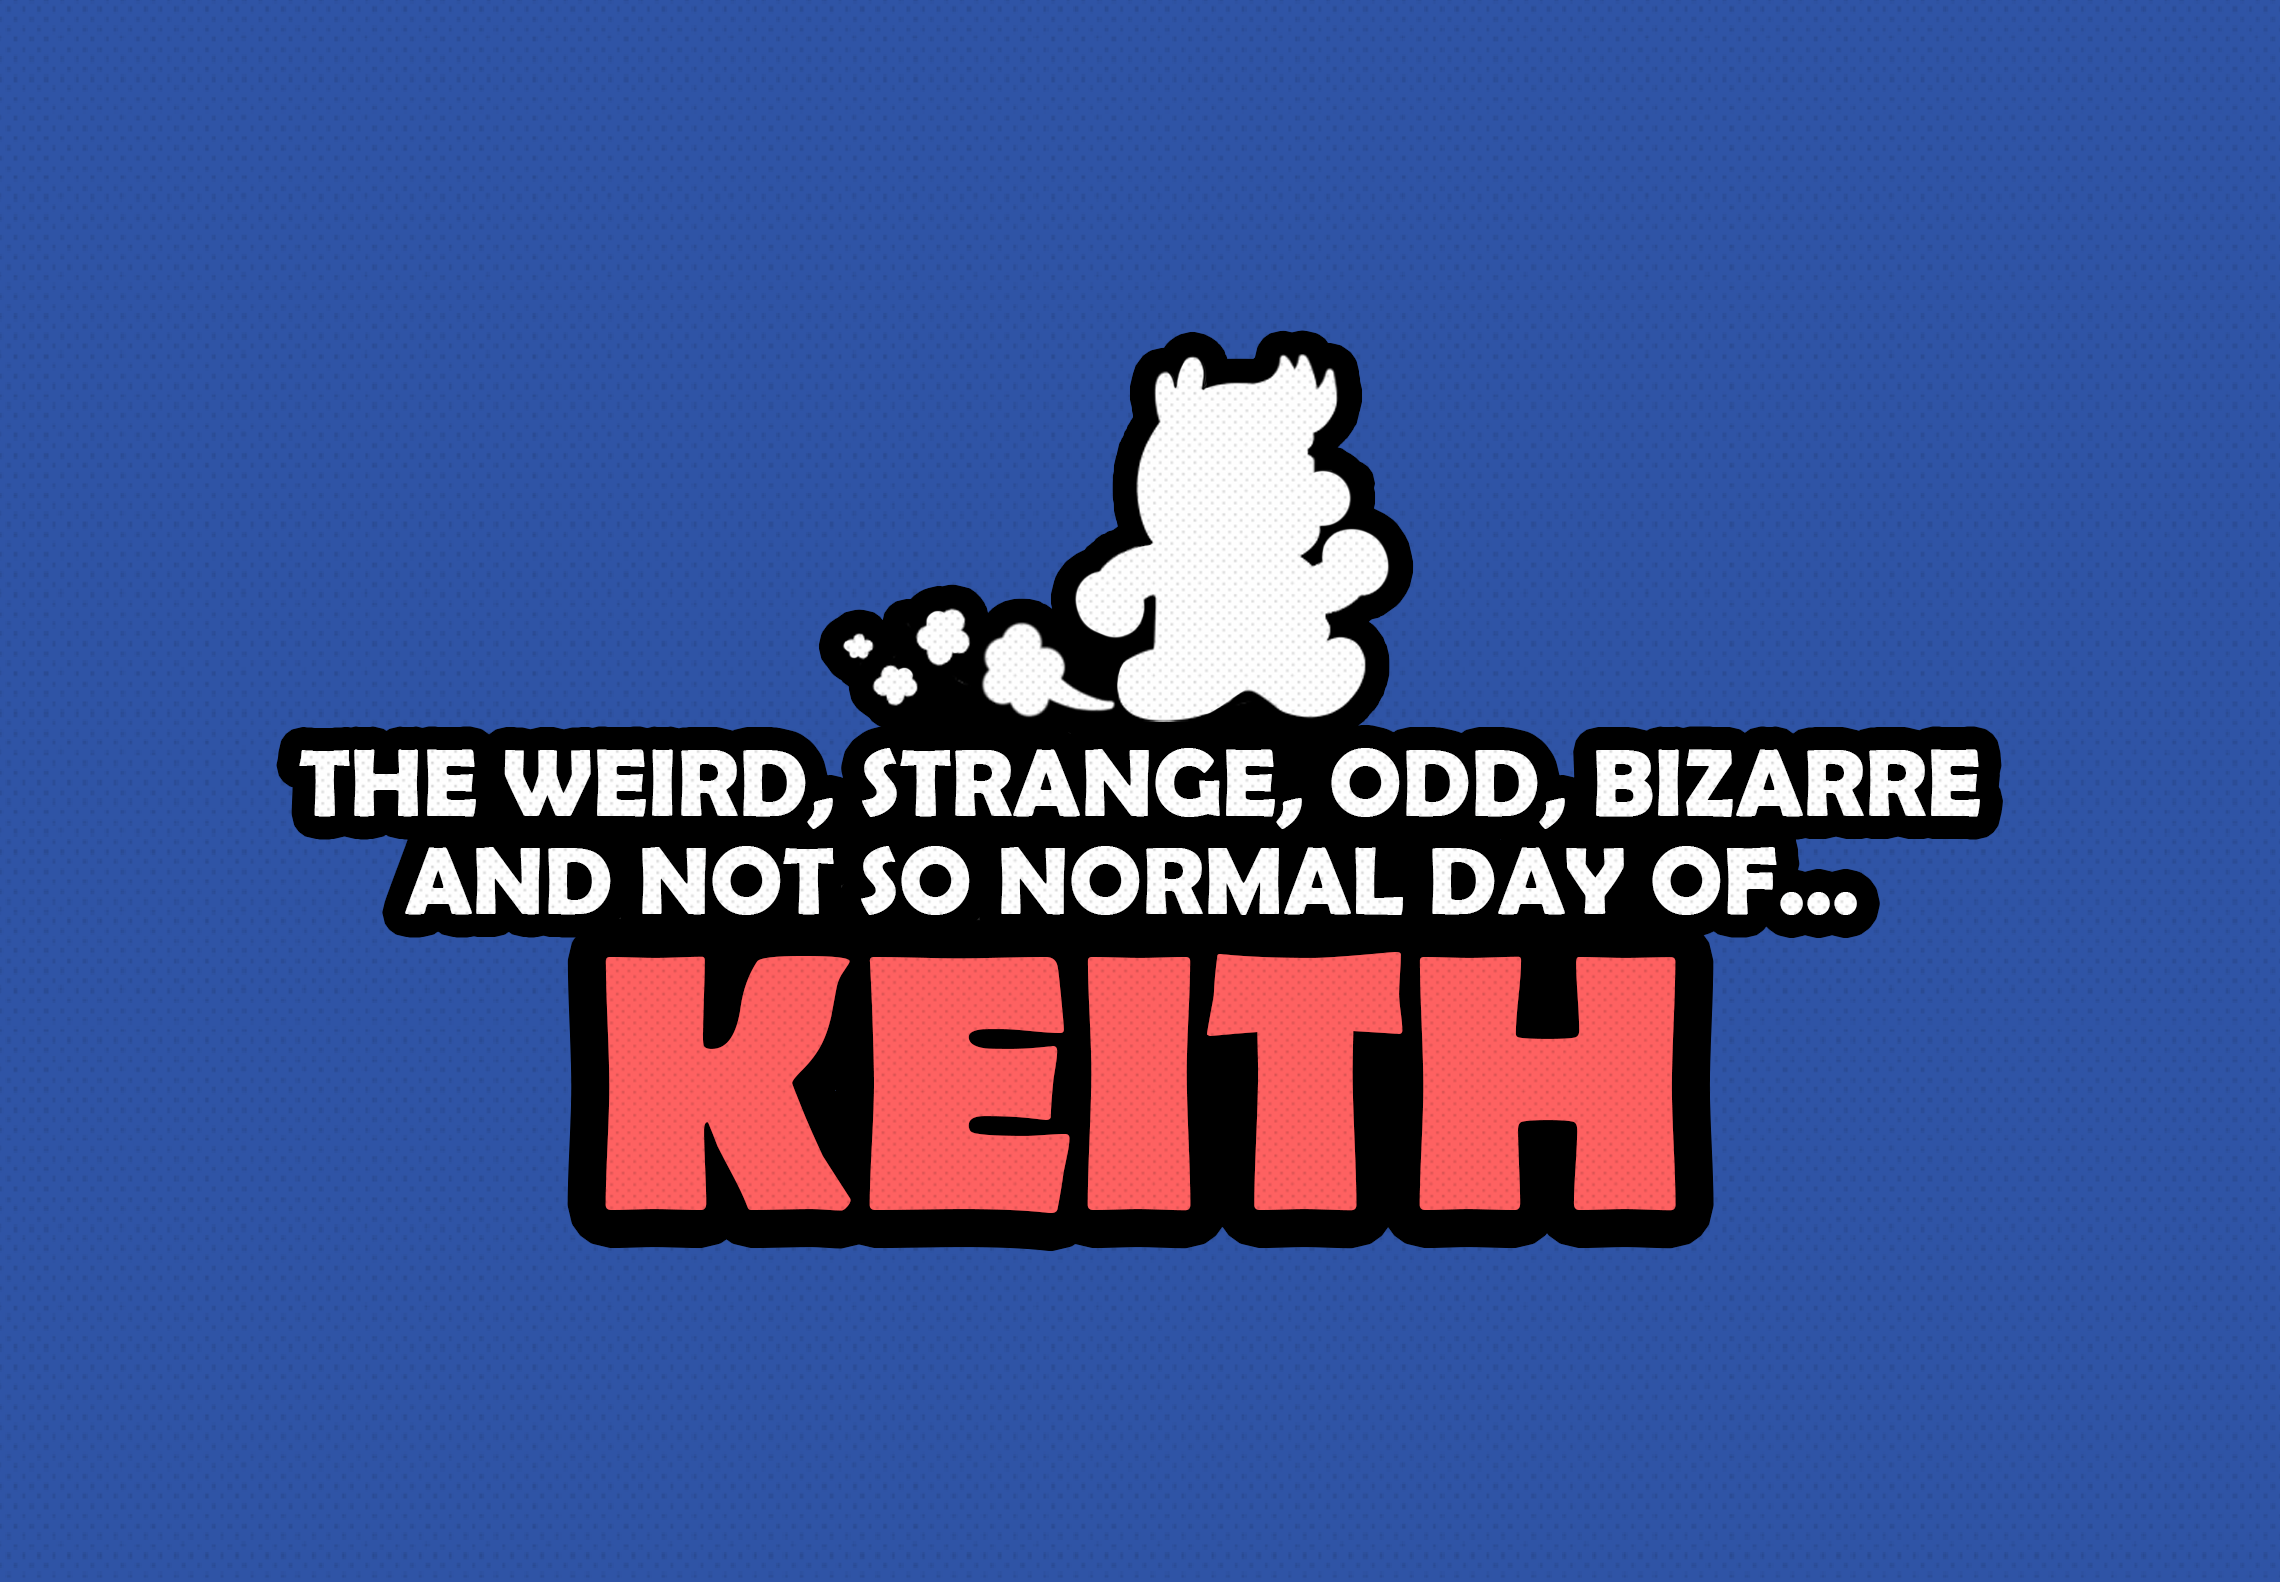 The Weird, Strange, Odd, Bizarre and Not so Normal day of KEITH